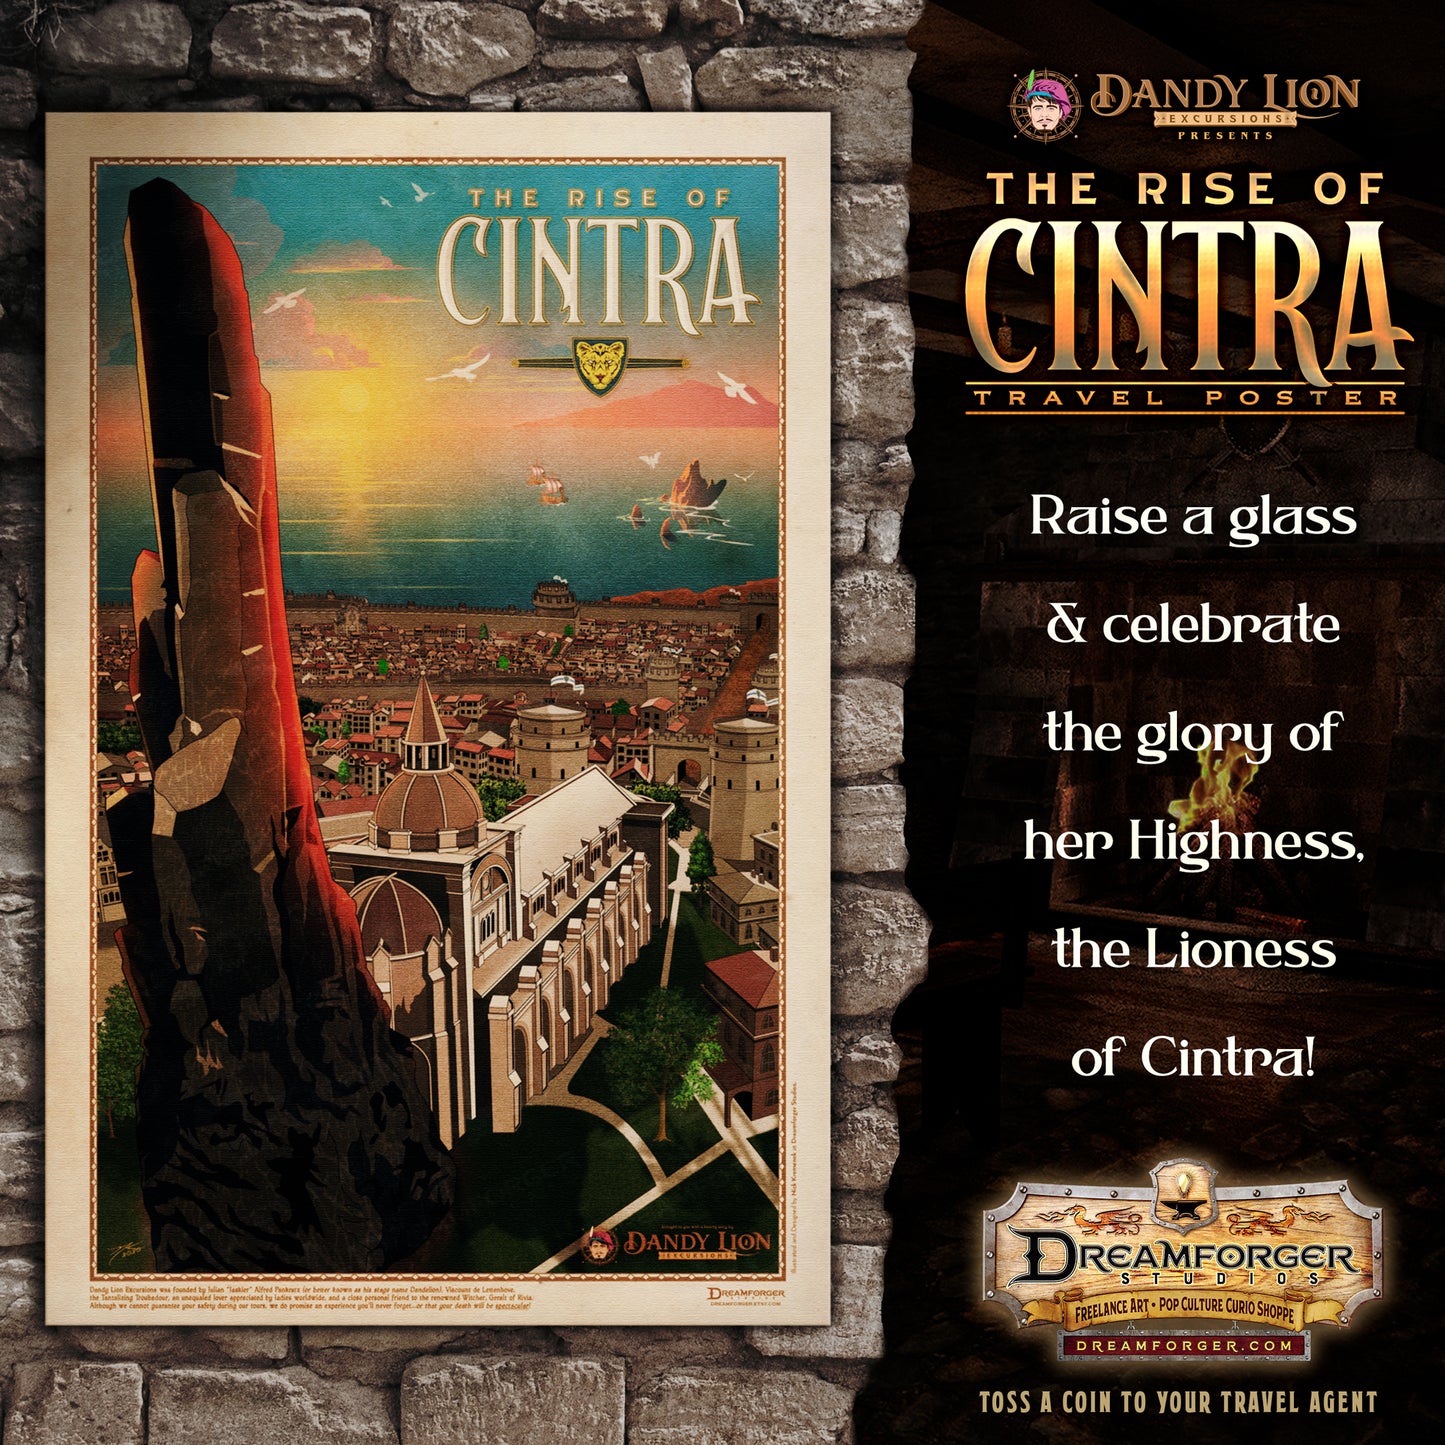 "The Rise of Cintra" (Dandy Lion Excursions Travel series)